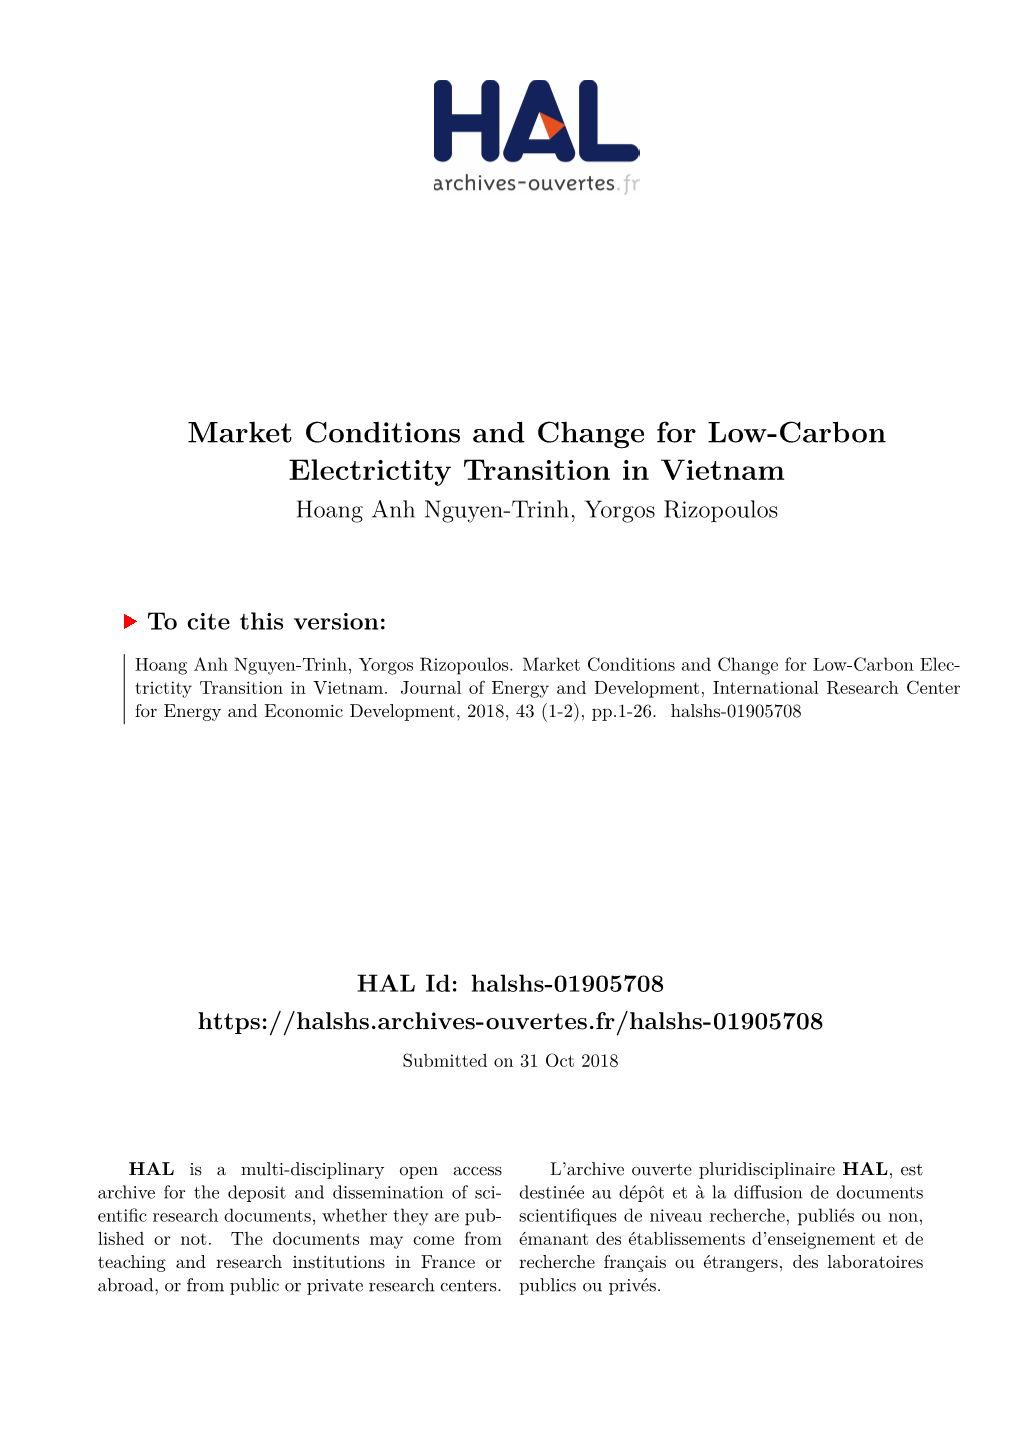 Market Conditions and Change for Low-Carbon Electrictity Transition in Vietnam Hoang Anh Nguyen-Trinh, Yorgos Rizopoulos